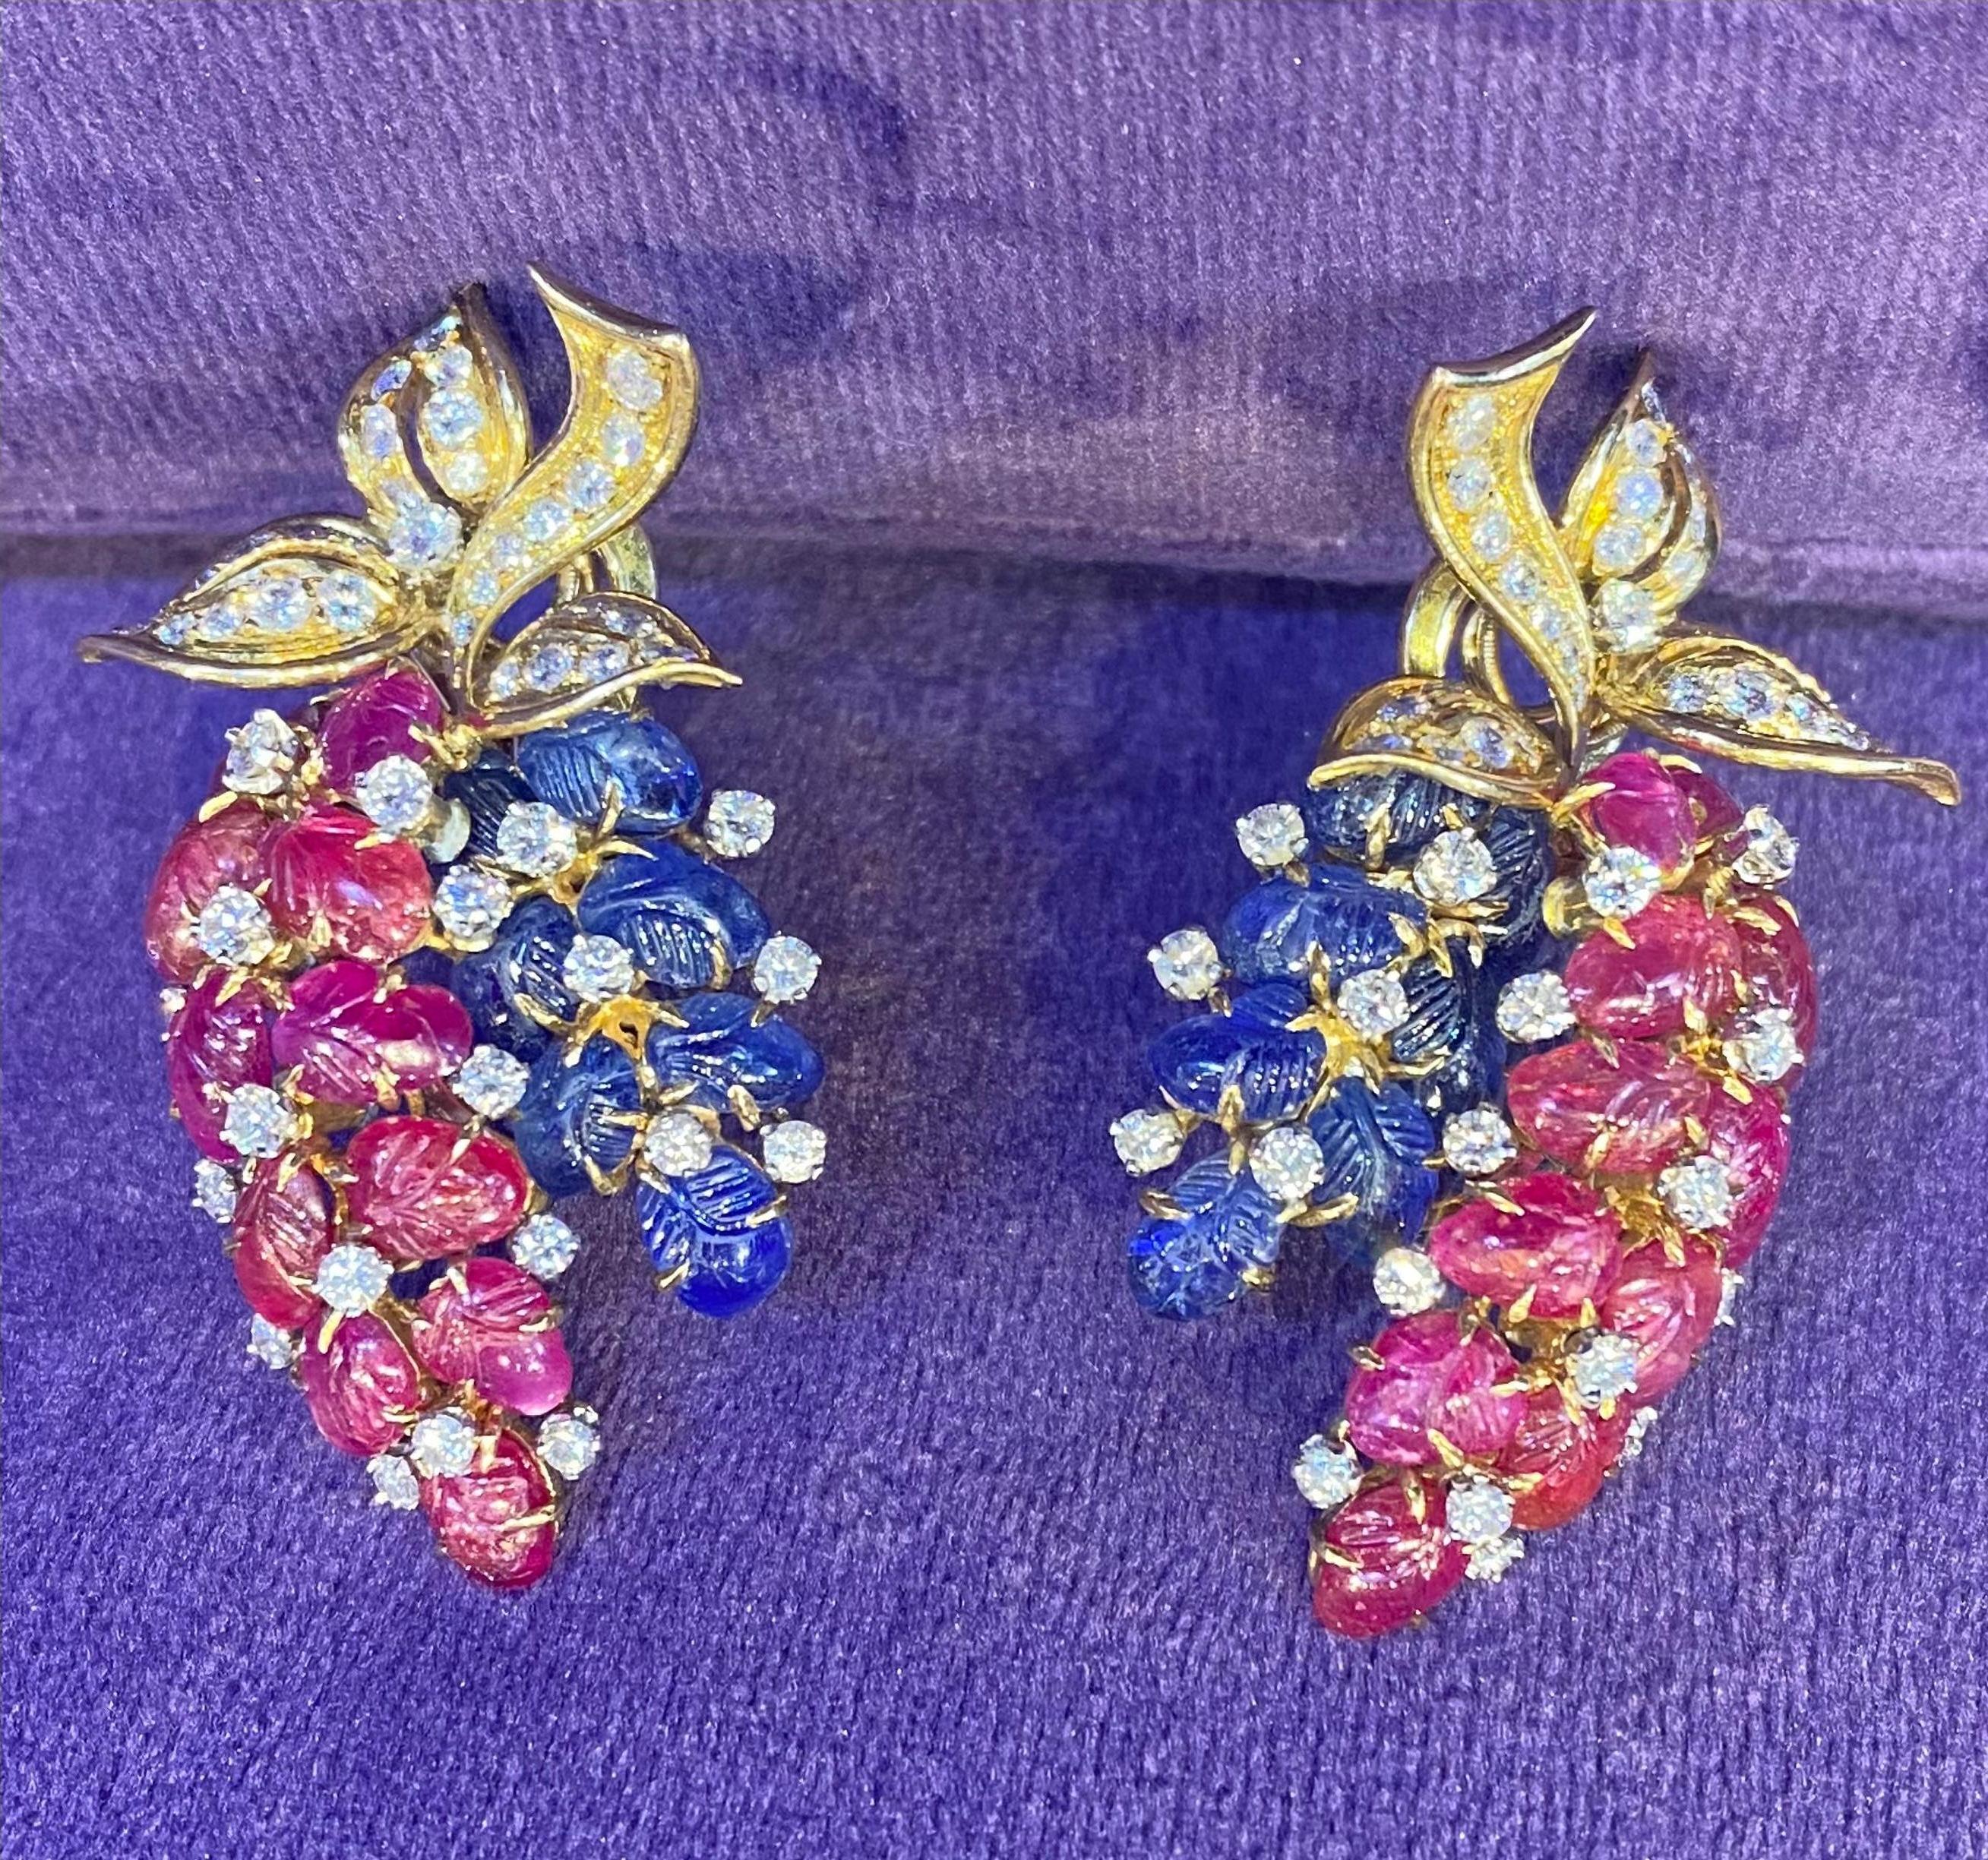 Bvlgari Tutti Frutti Earrings In Excellent Condition For Sale In New York, NY